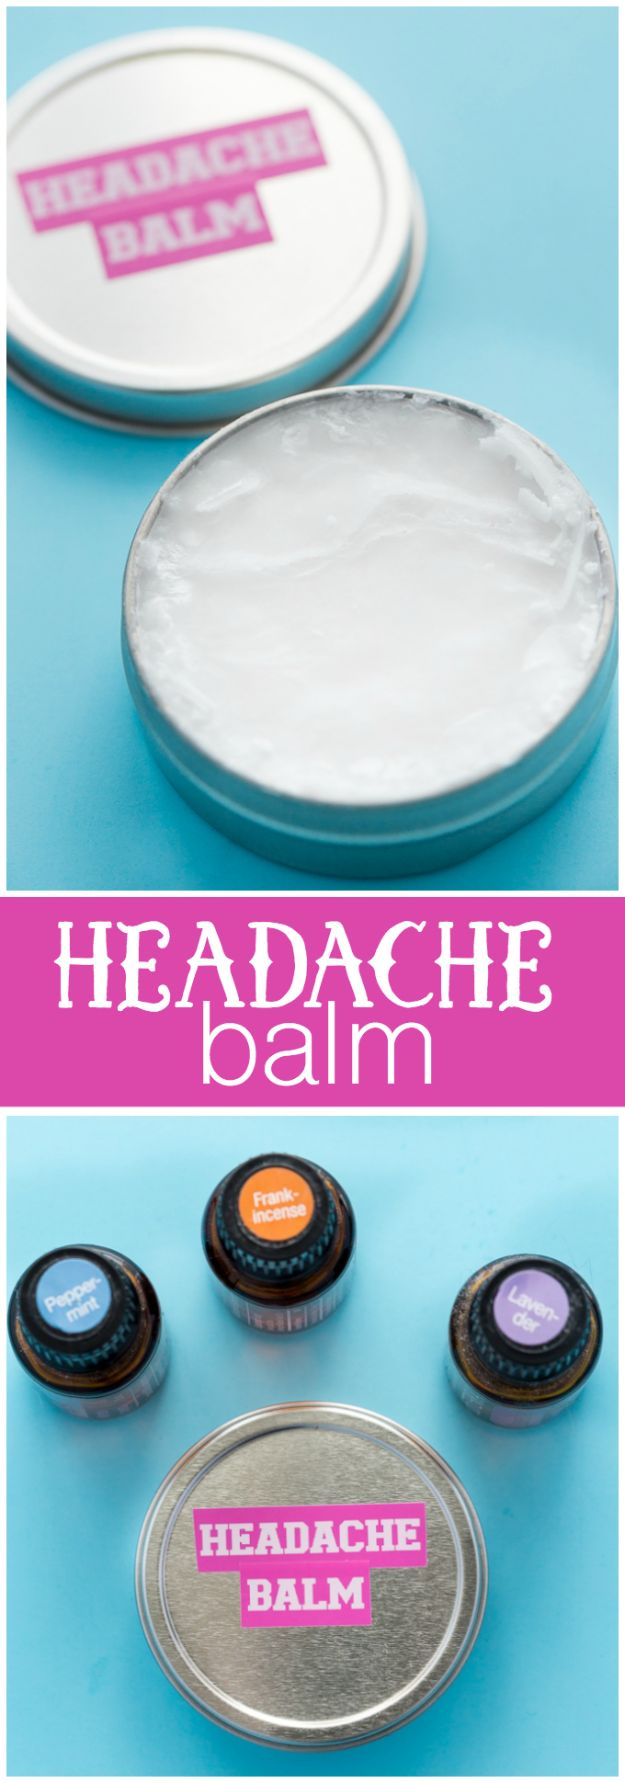 DIY Essential Oil Recipes and Ideas - Headache Balm - Cool Recipes, Crafts and Home Decor to Make With Essential Oil - Diffuser Projects, Roll On Prodicts for Skin - Recipe Tutorials for Cleaning, Colds, For Sleep, For Hair, For Paint, For Weight Loss #crafts #diy #essentialoils